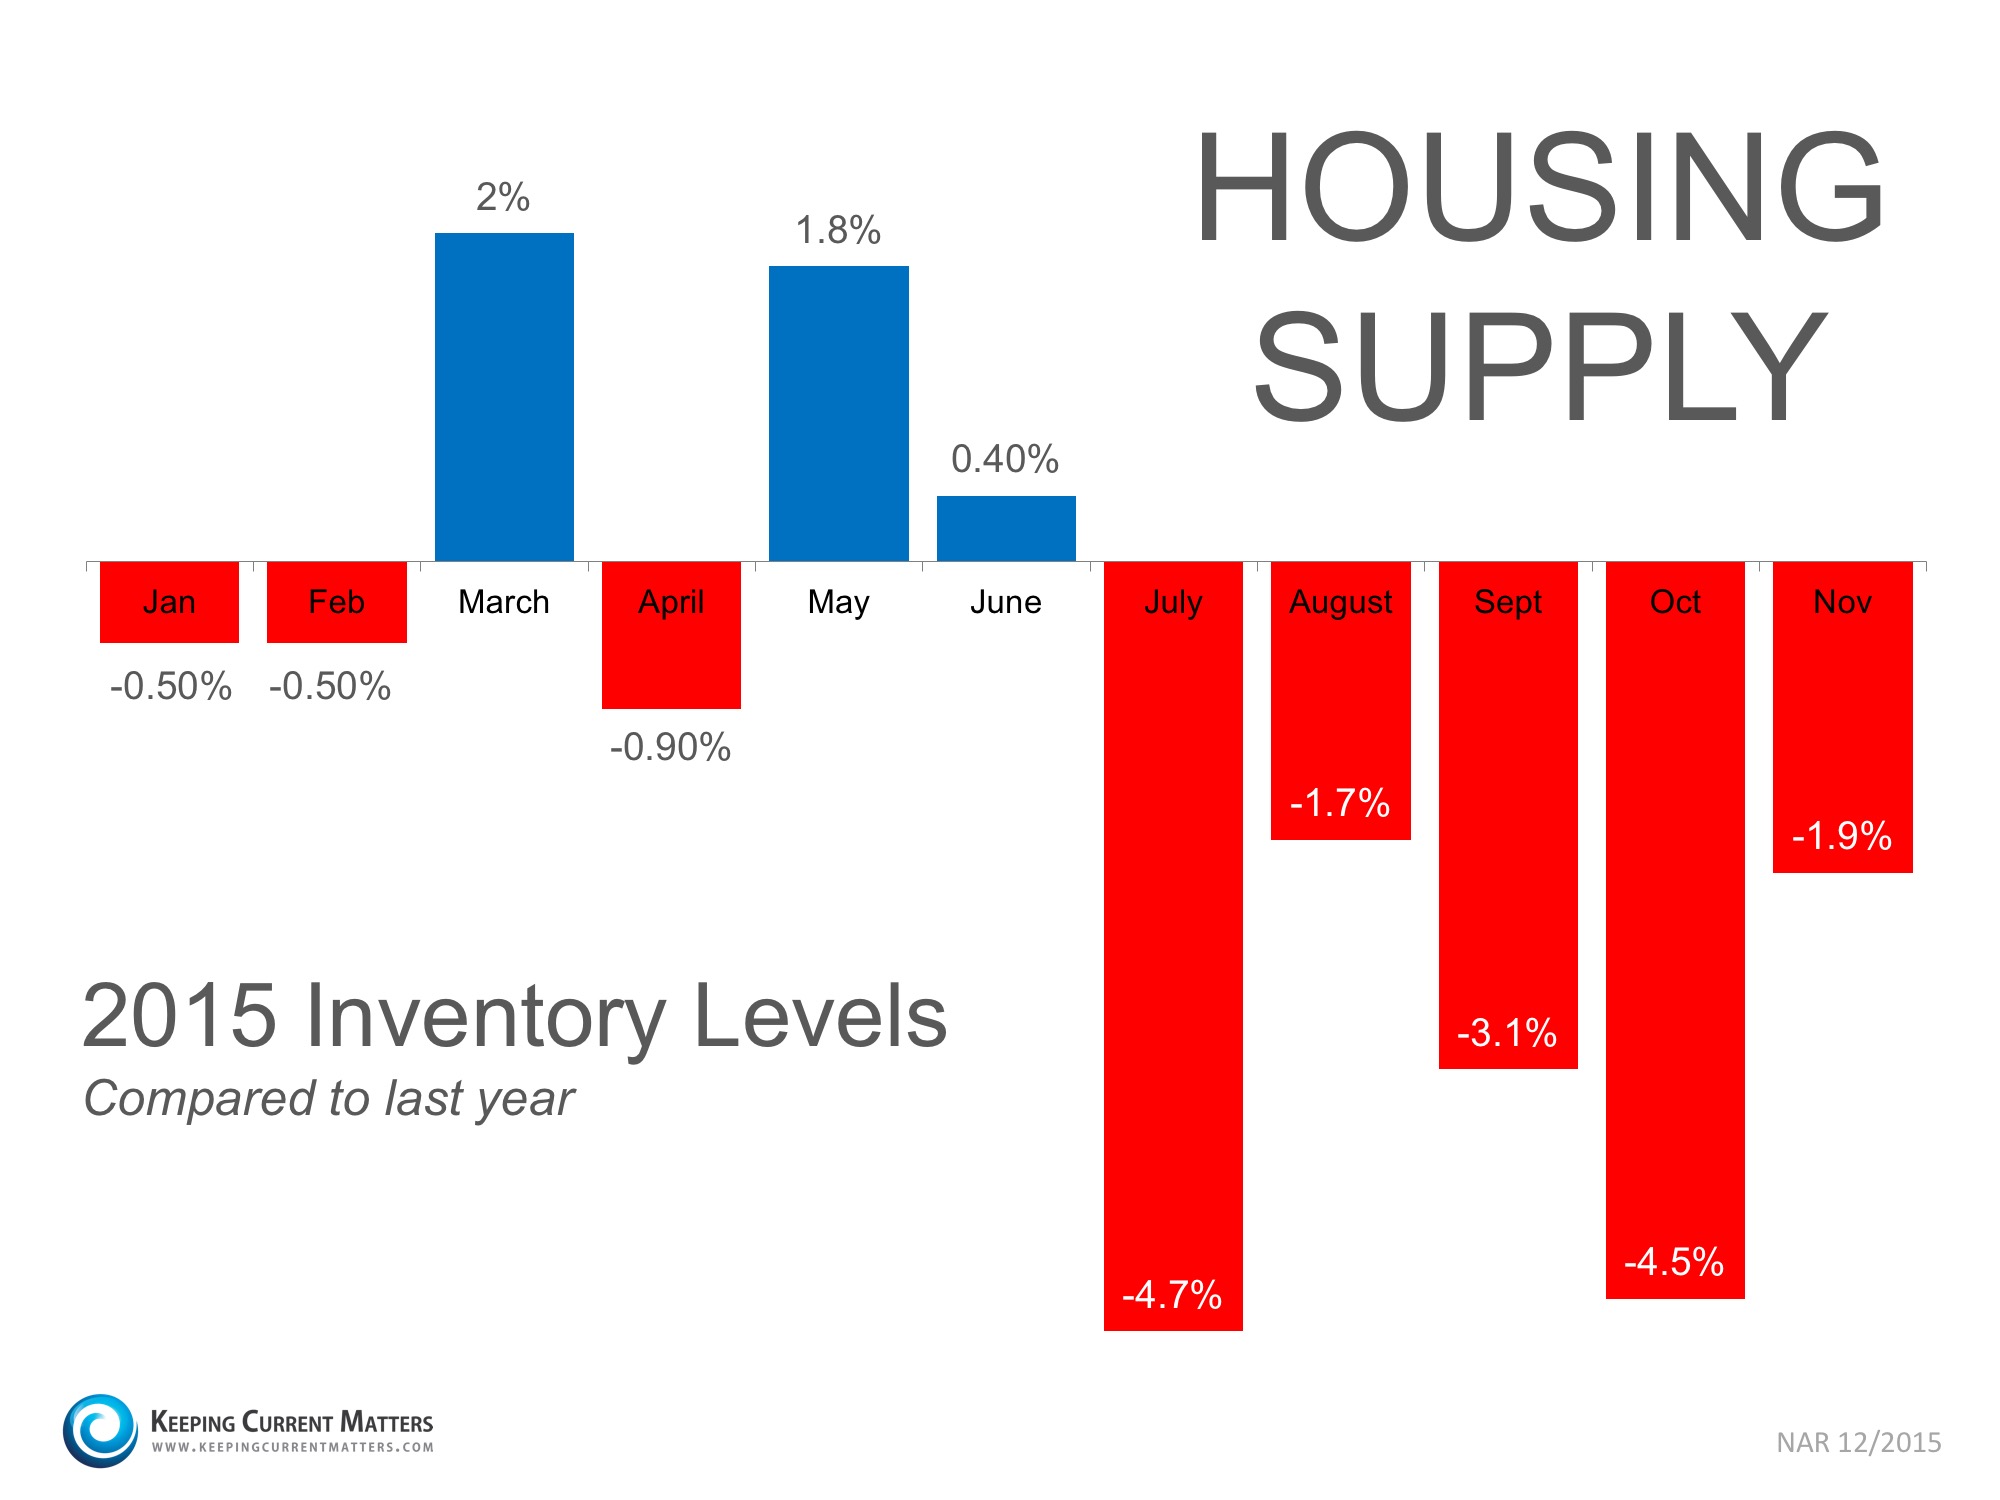 Housing Supply Year-Over-Year | Keeping Current Matters